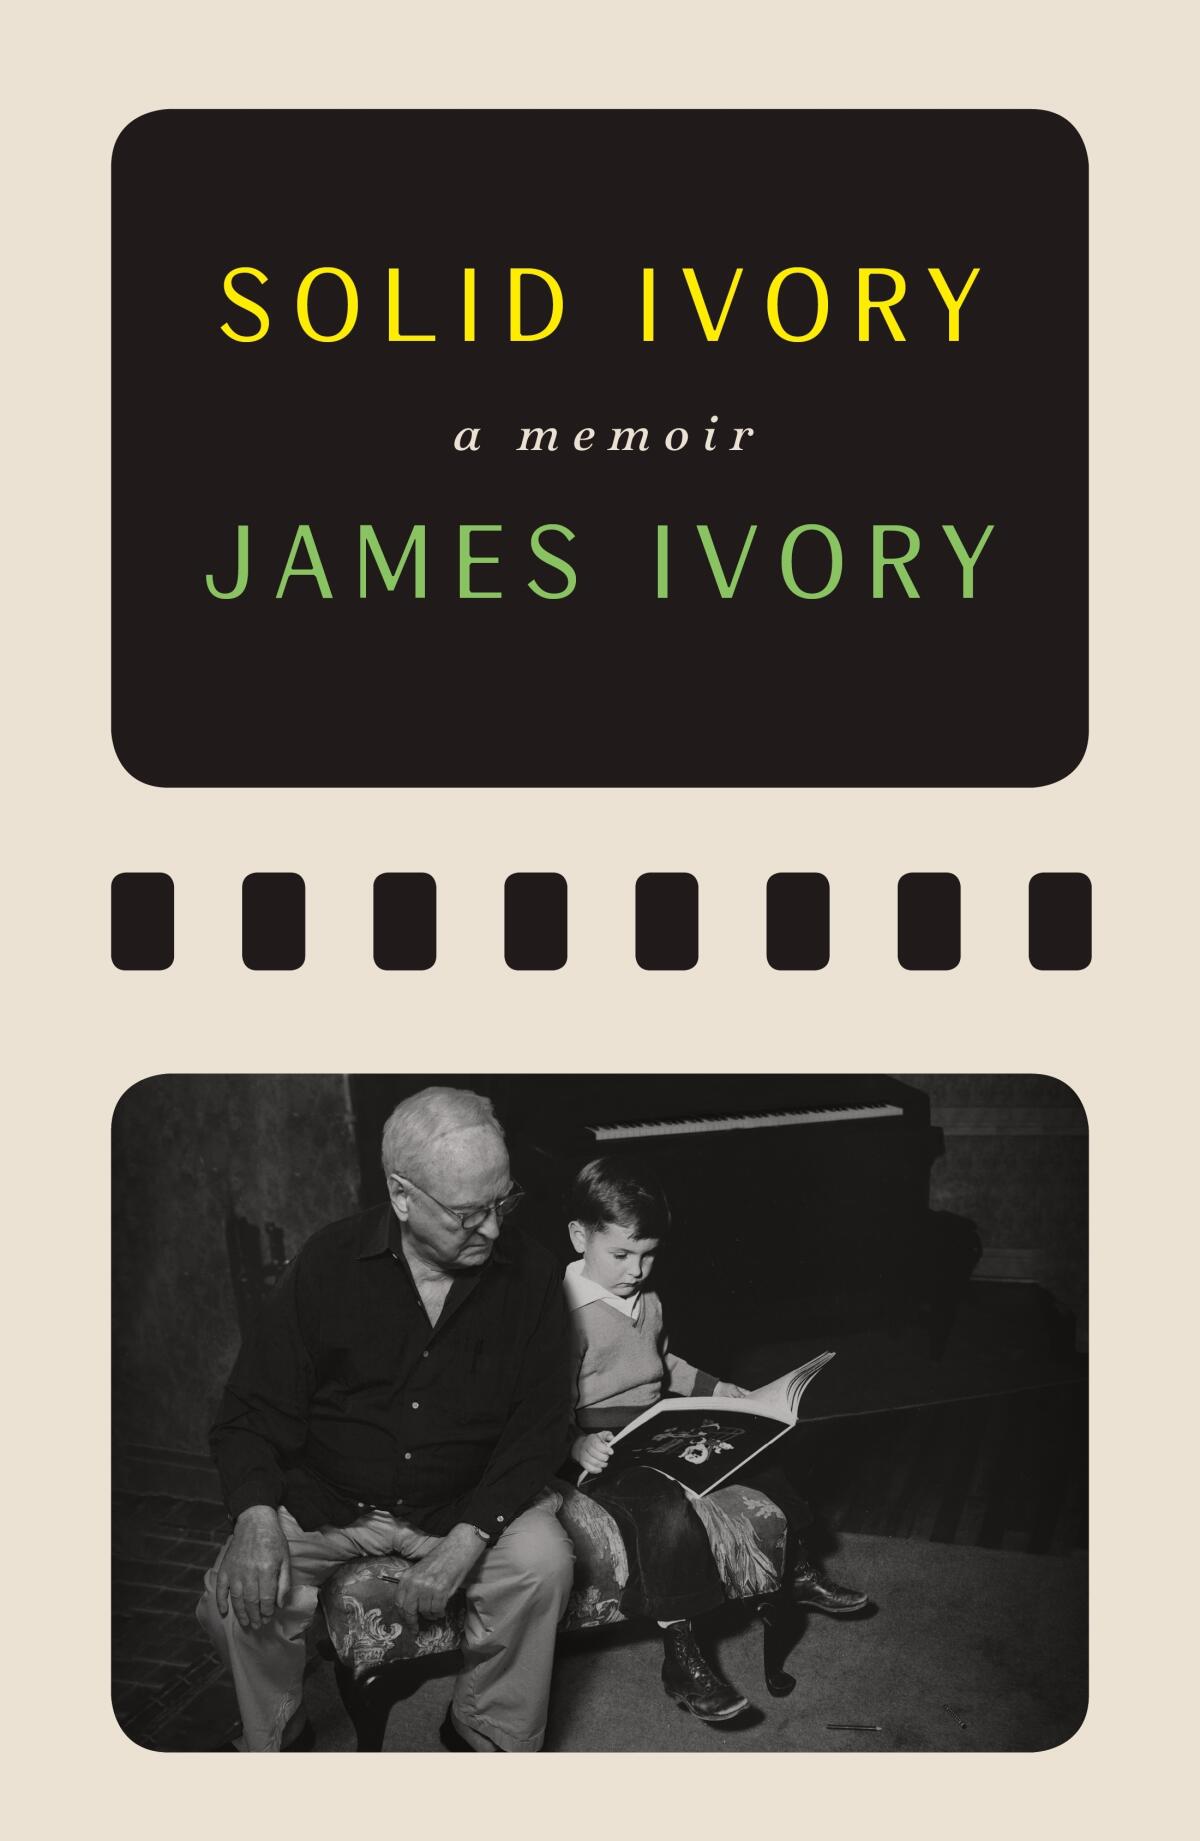 This cover image released by Farrar, Straus and Giroux shows "Solid Ivory" by James Ivory. (Farrar, Straus and Giroux via AP)